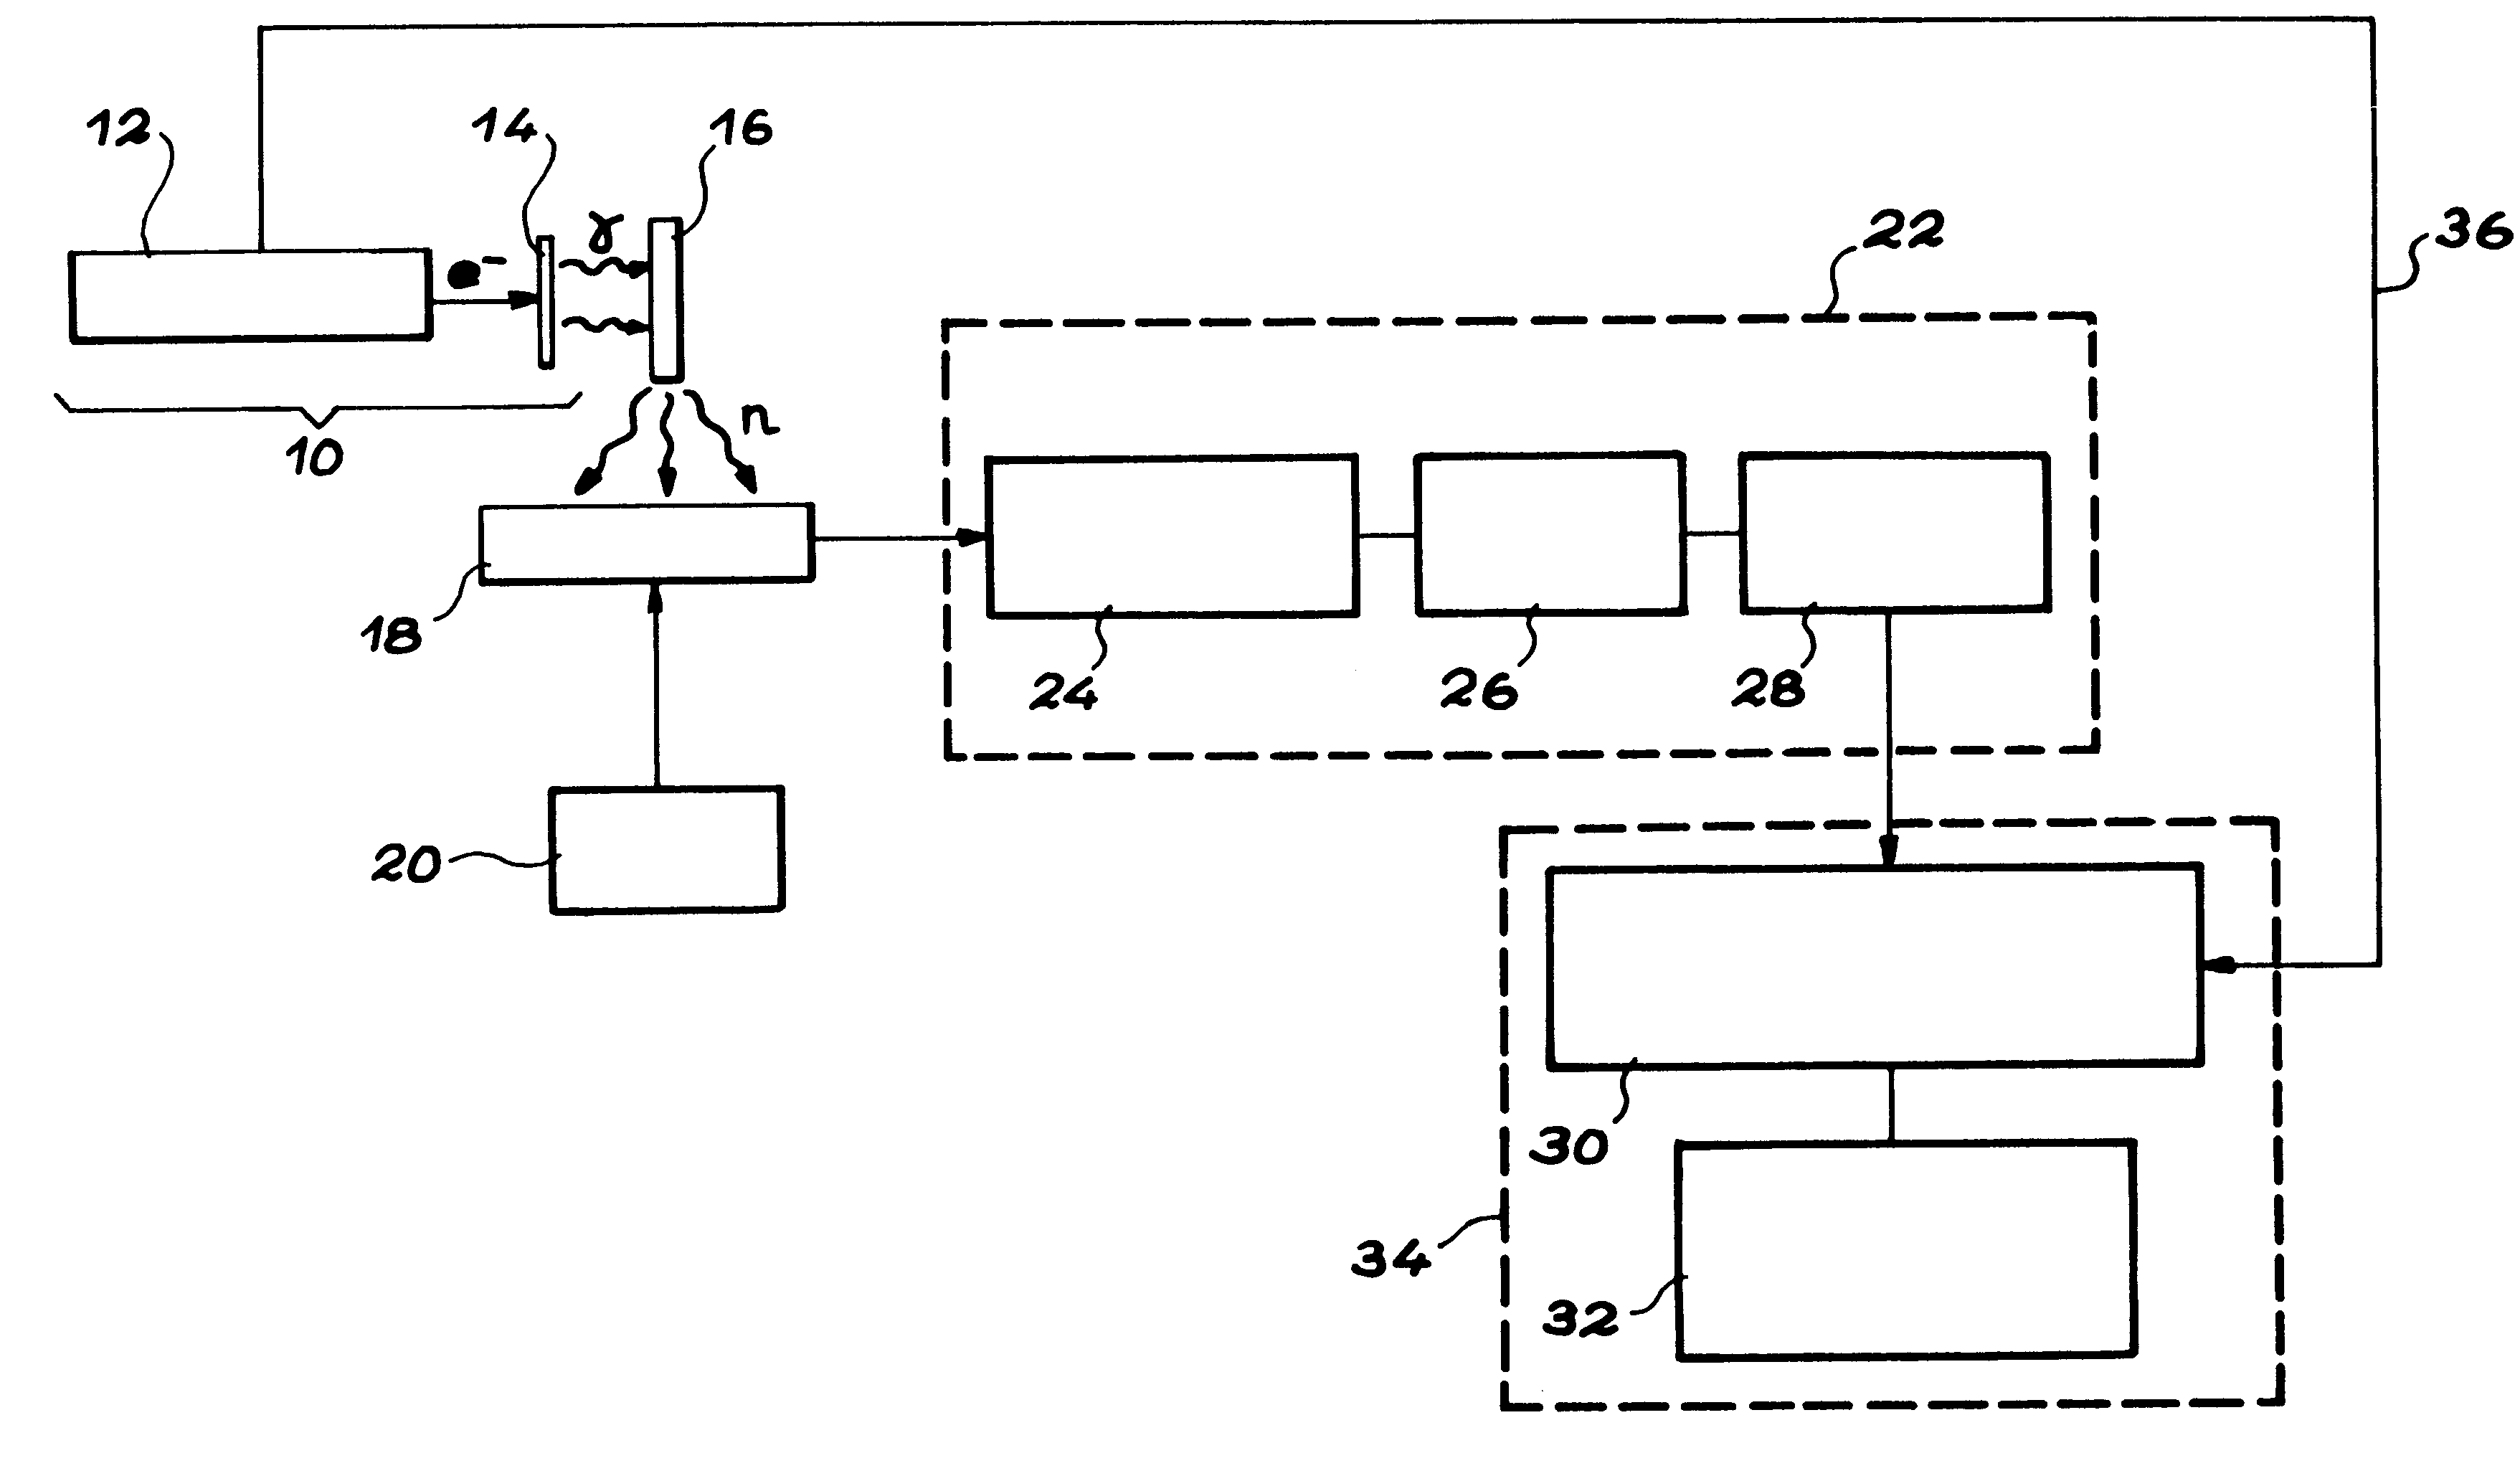 Method and device for measuring the relative proportions of plutonium and uranium in a body